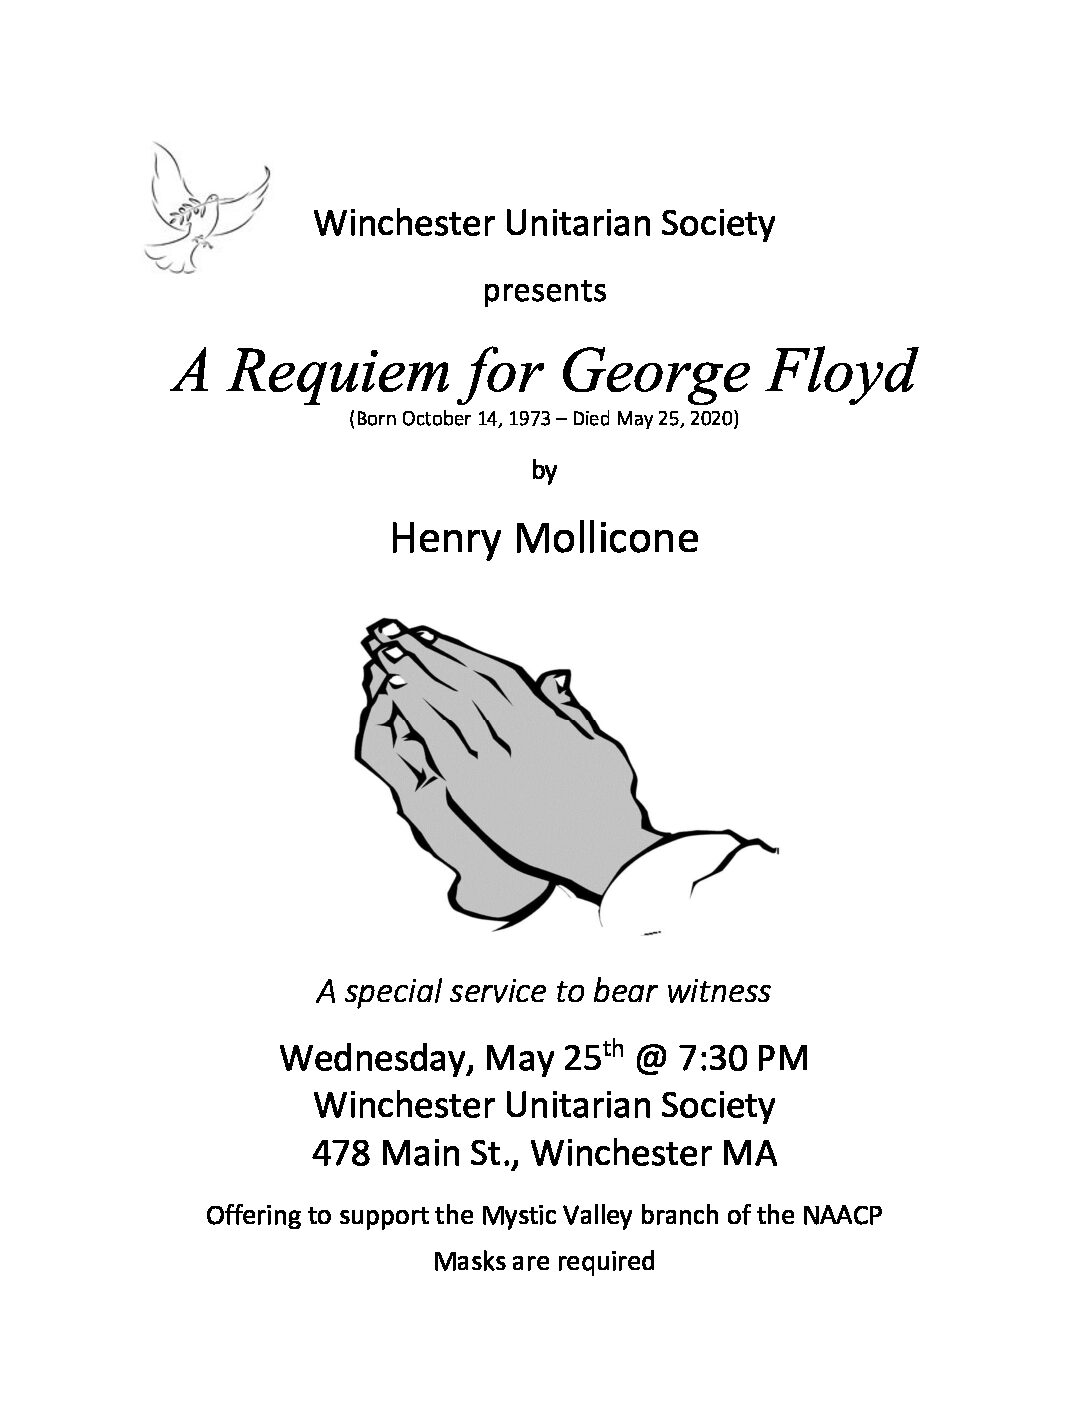 A Requiem for George Floyd Concert